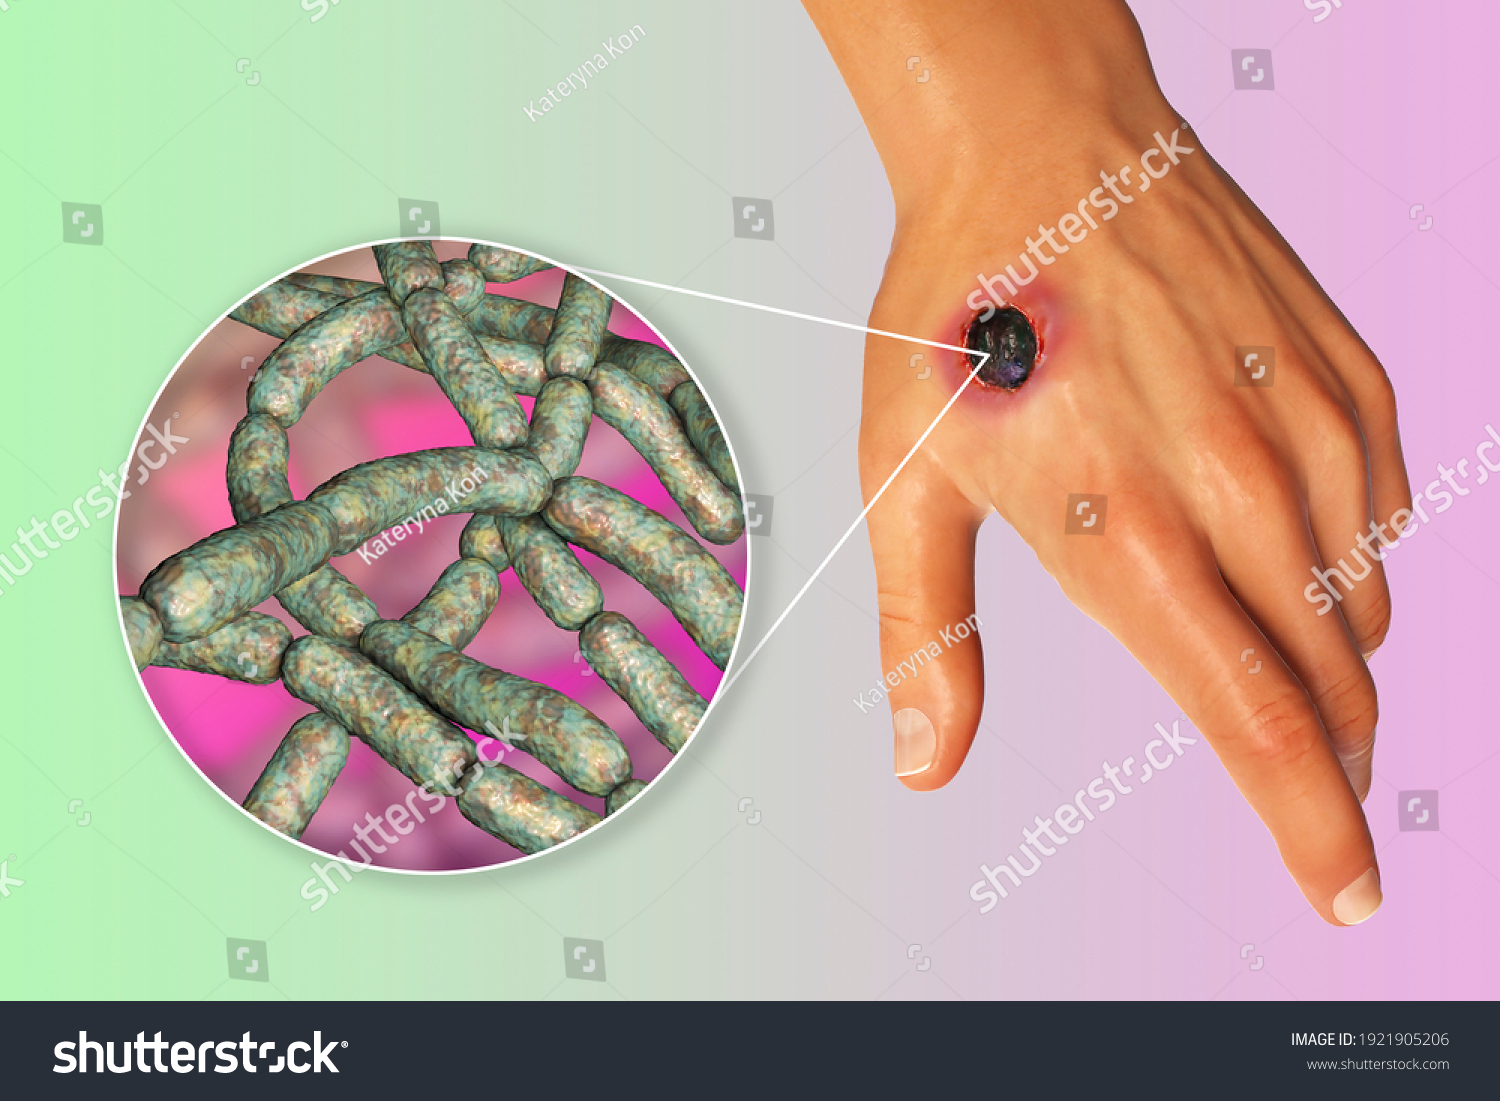 Cutaneous Anthrax Most Common Form Anthrax Stock Illustration 1921905206 Shutterstock 8223